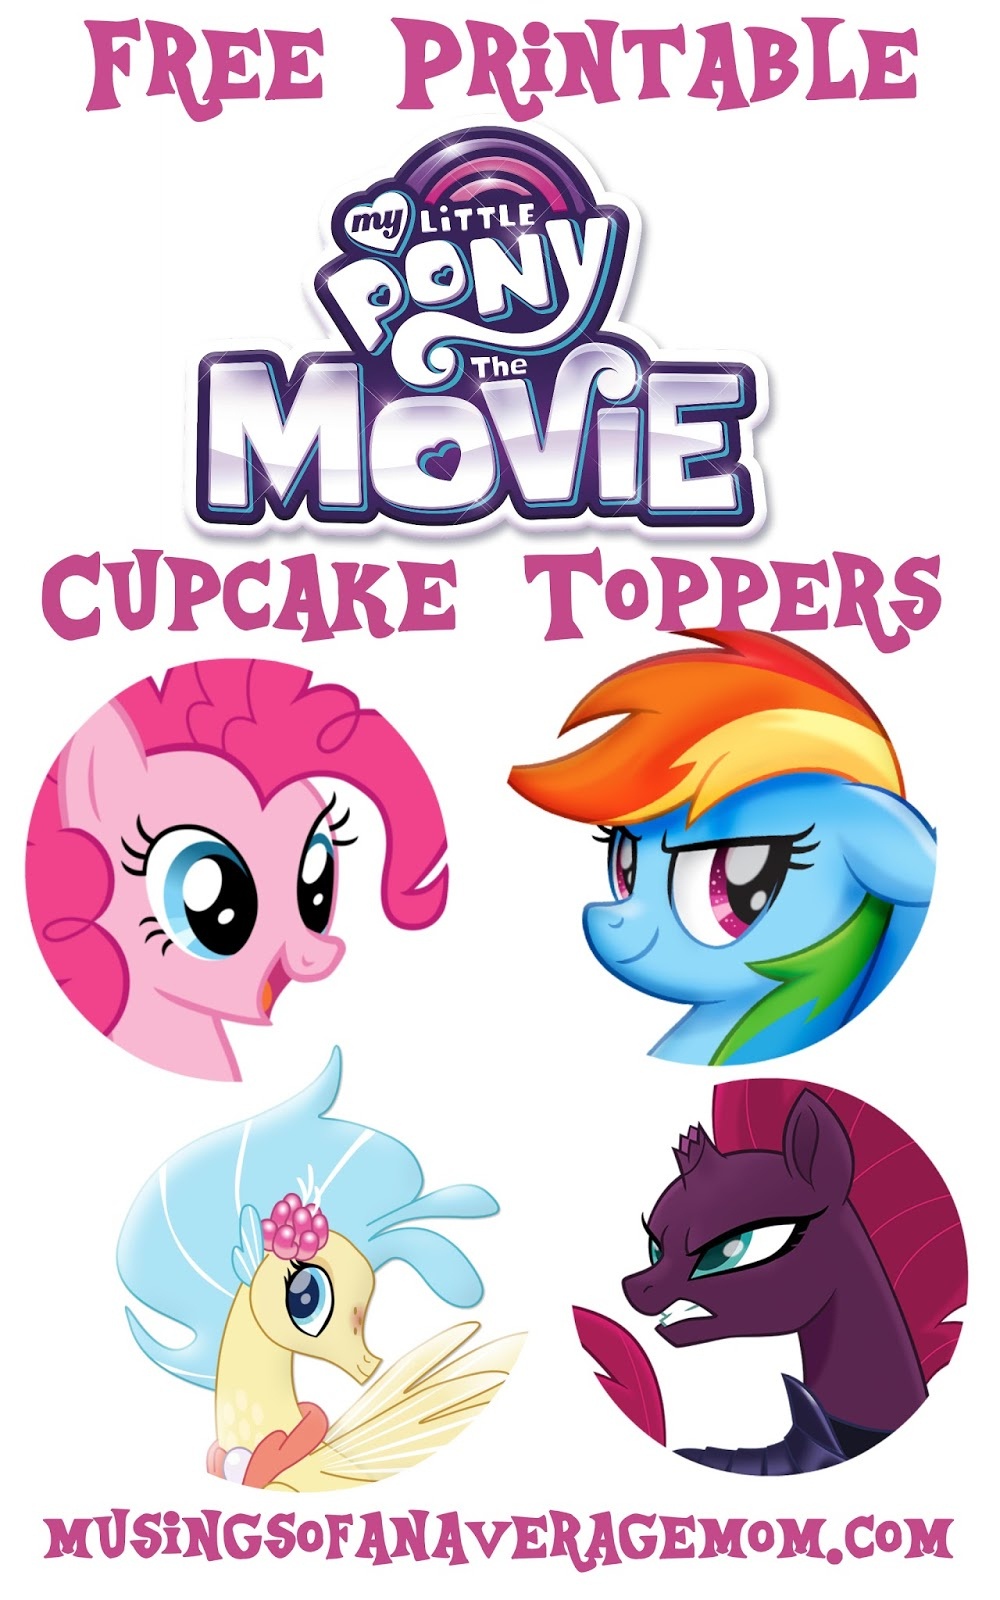 Musings Of An Average Mom: My Little Pony Movie - Cupcake Toppers - My Little Pony Free Printables